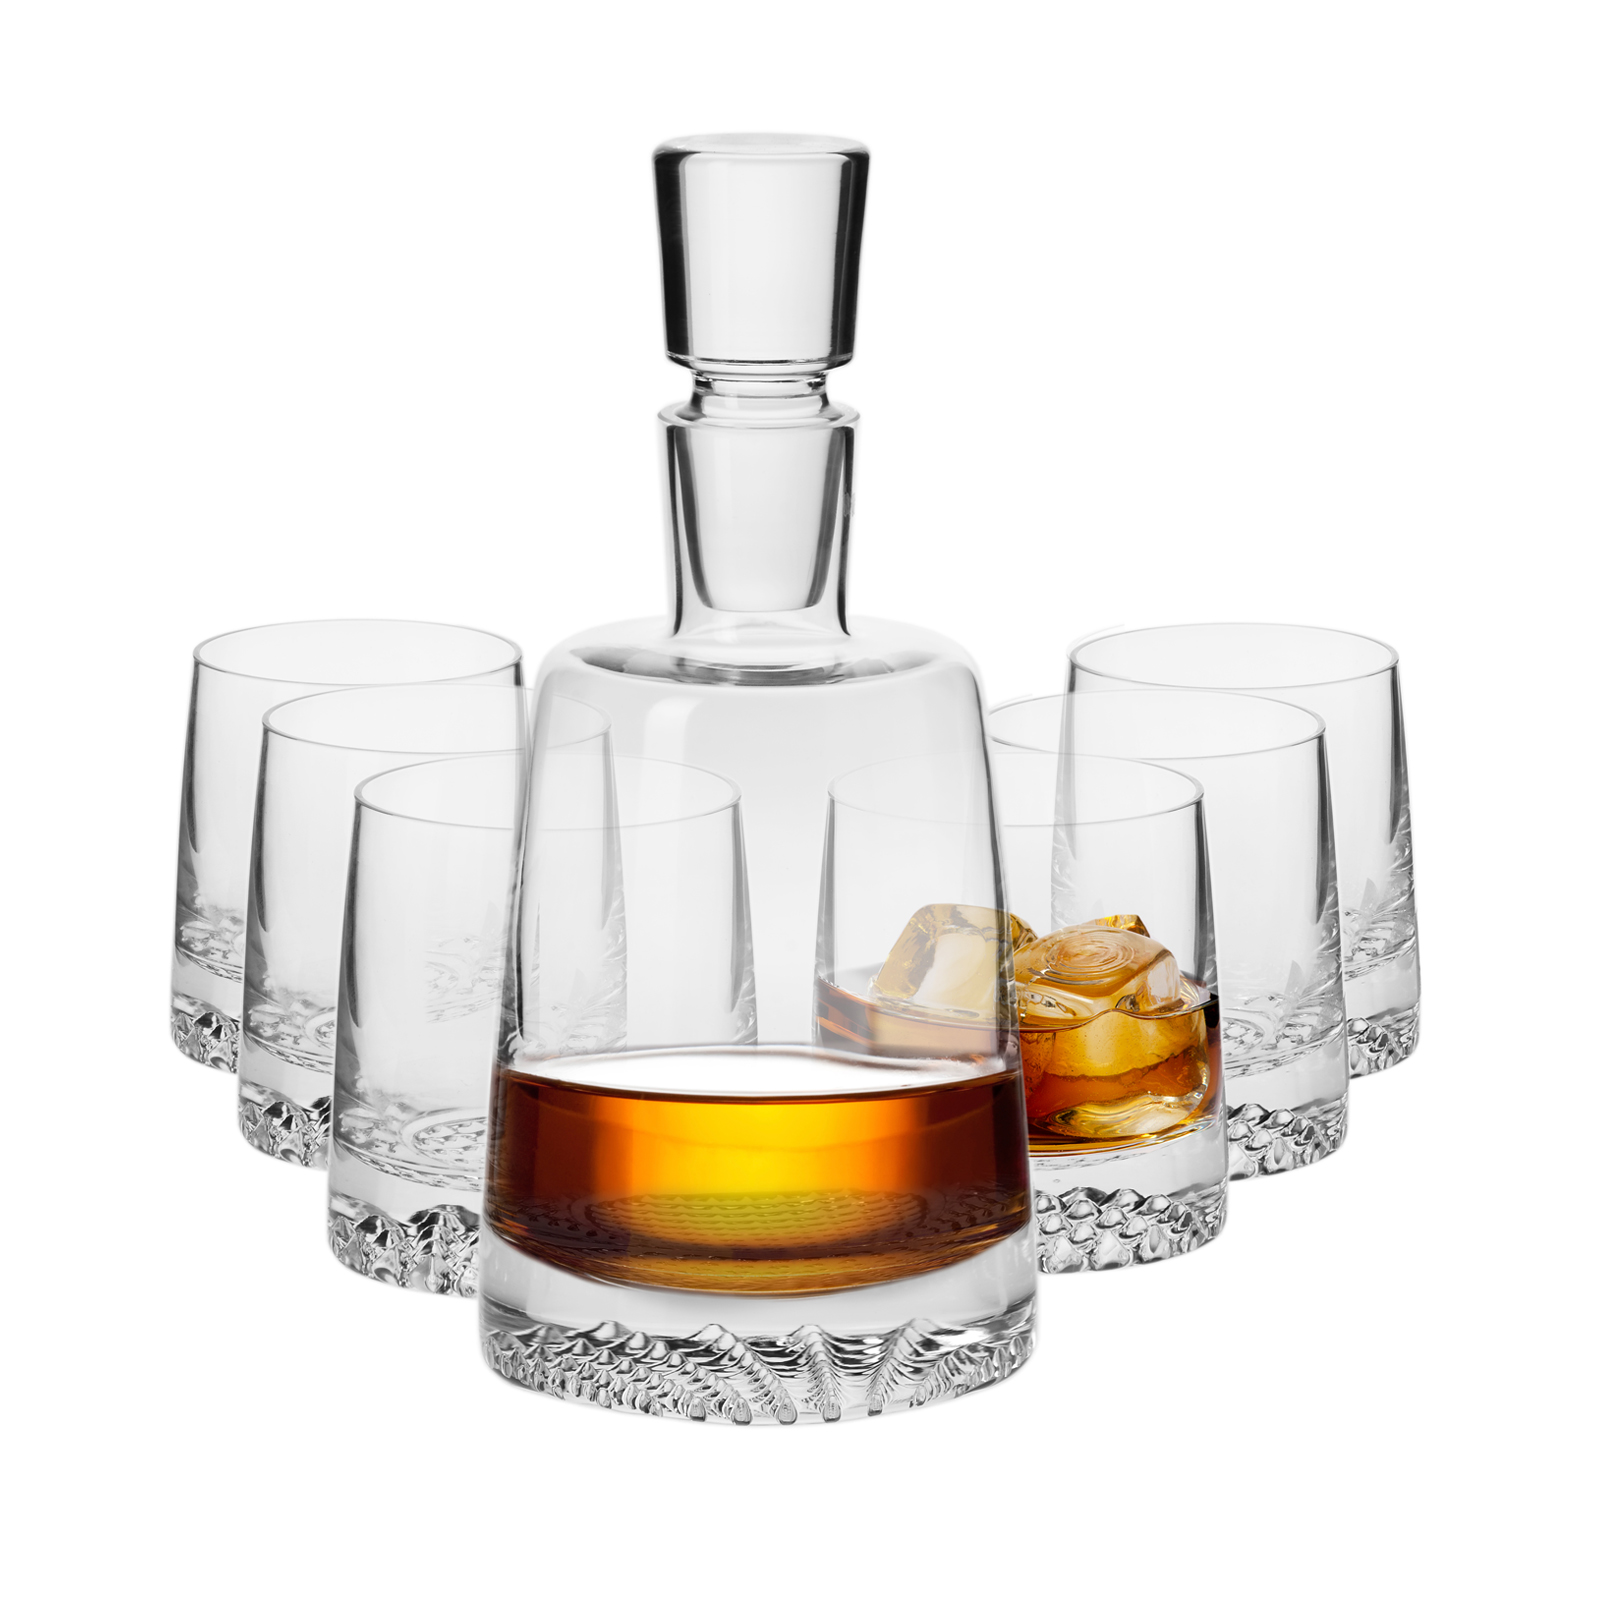 Magnificent 7-piece whiskey set